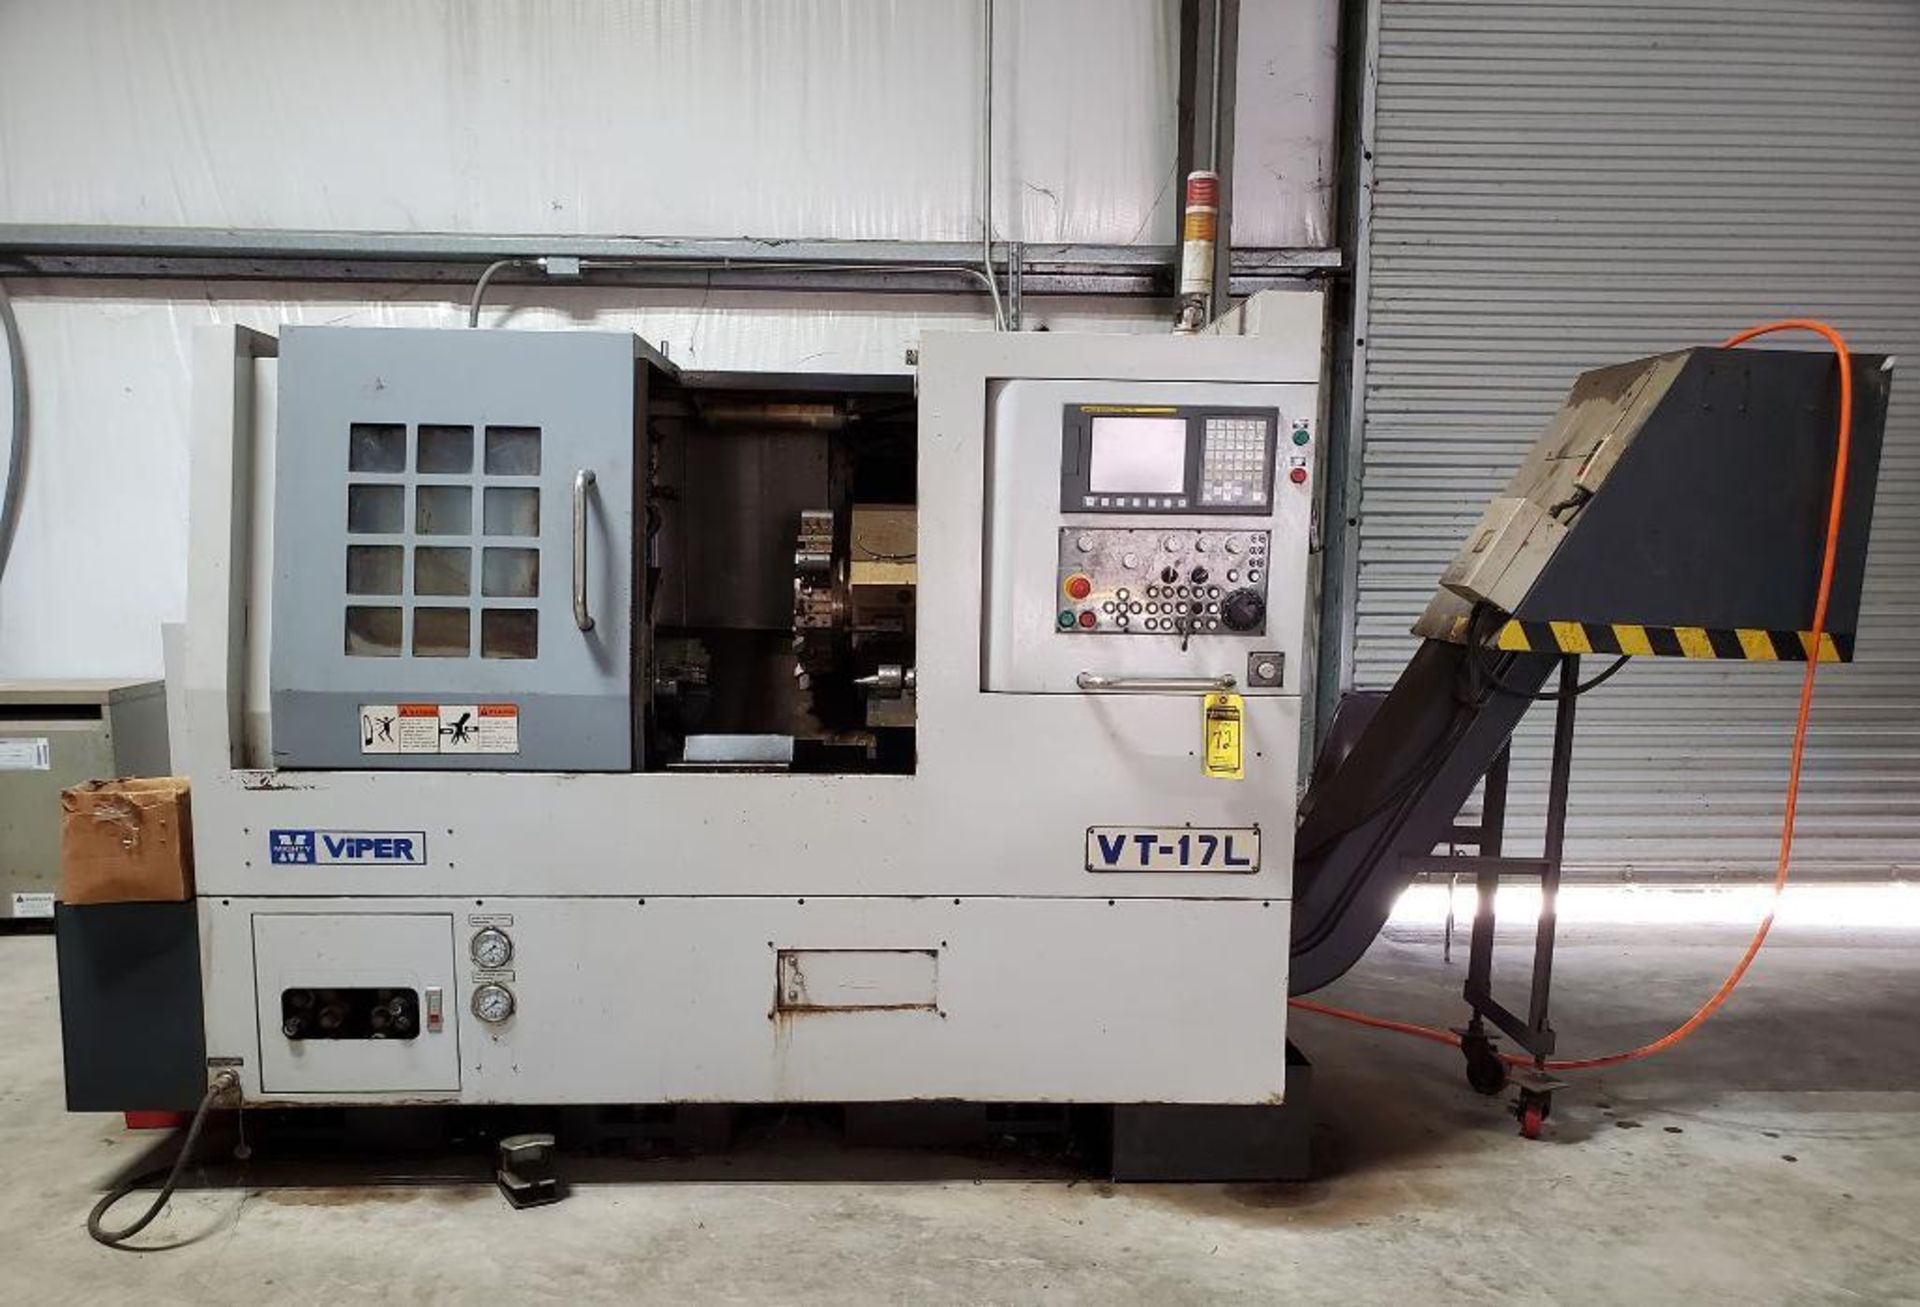 2001 MIGHTY VIPER VT-17L CNC TURNING CENTER; S/N 5311104012, 12-STATION TURRET, 3-JAW CHUCK, CHIP